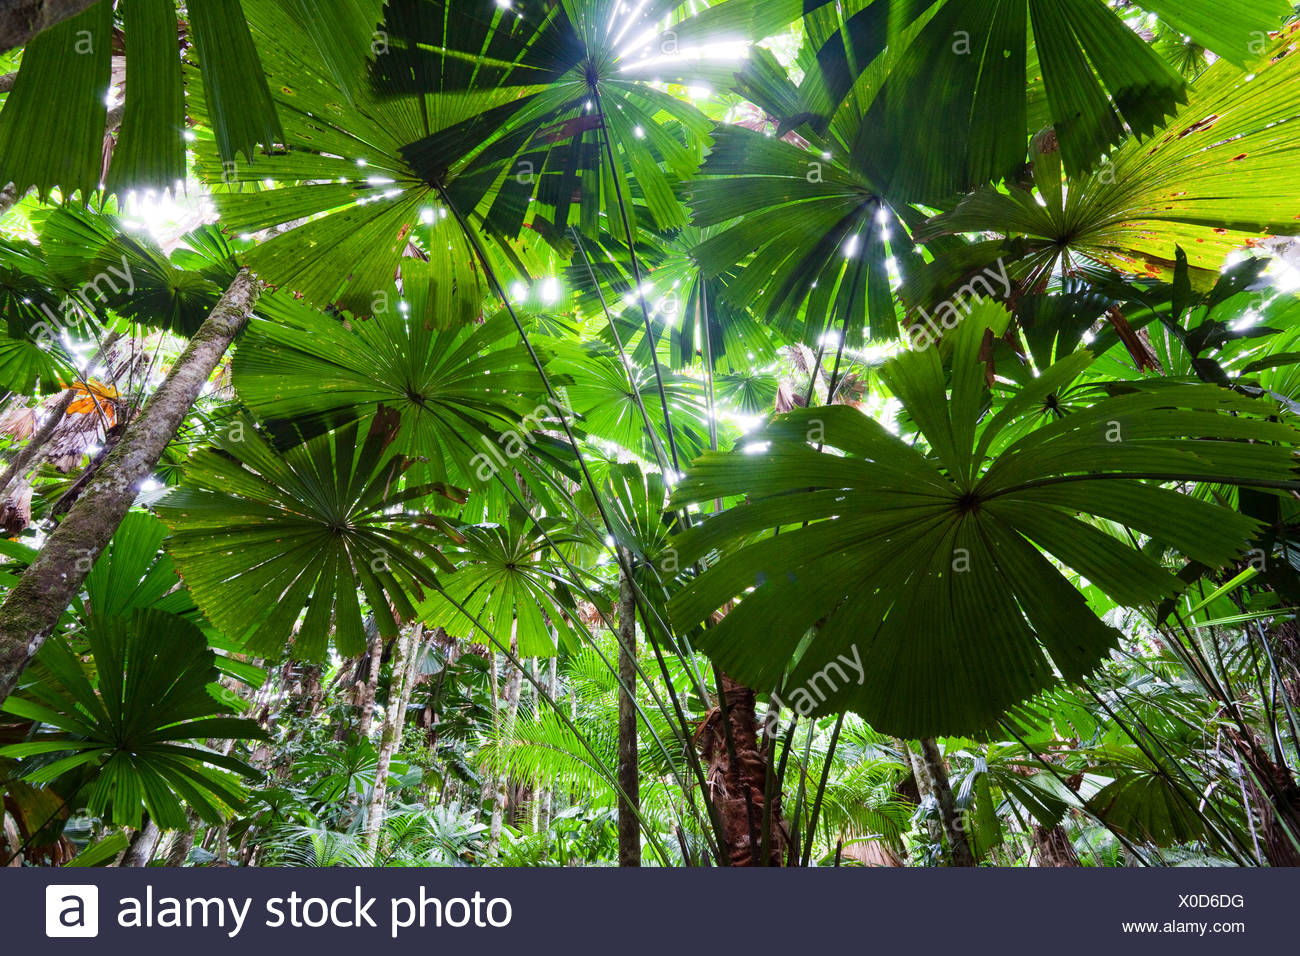 Rainforest High Resolution Stock Photography and Images - Alamy